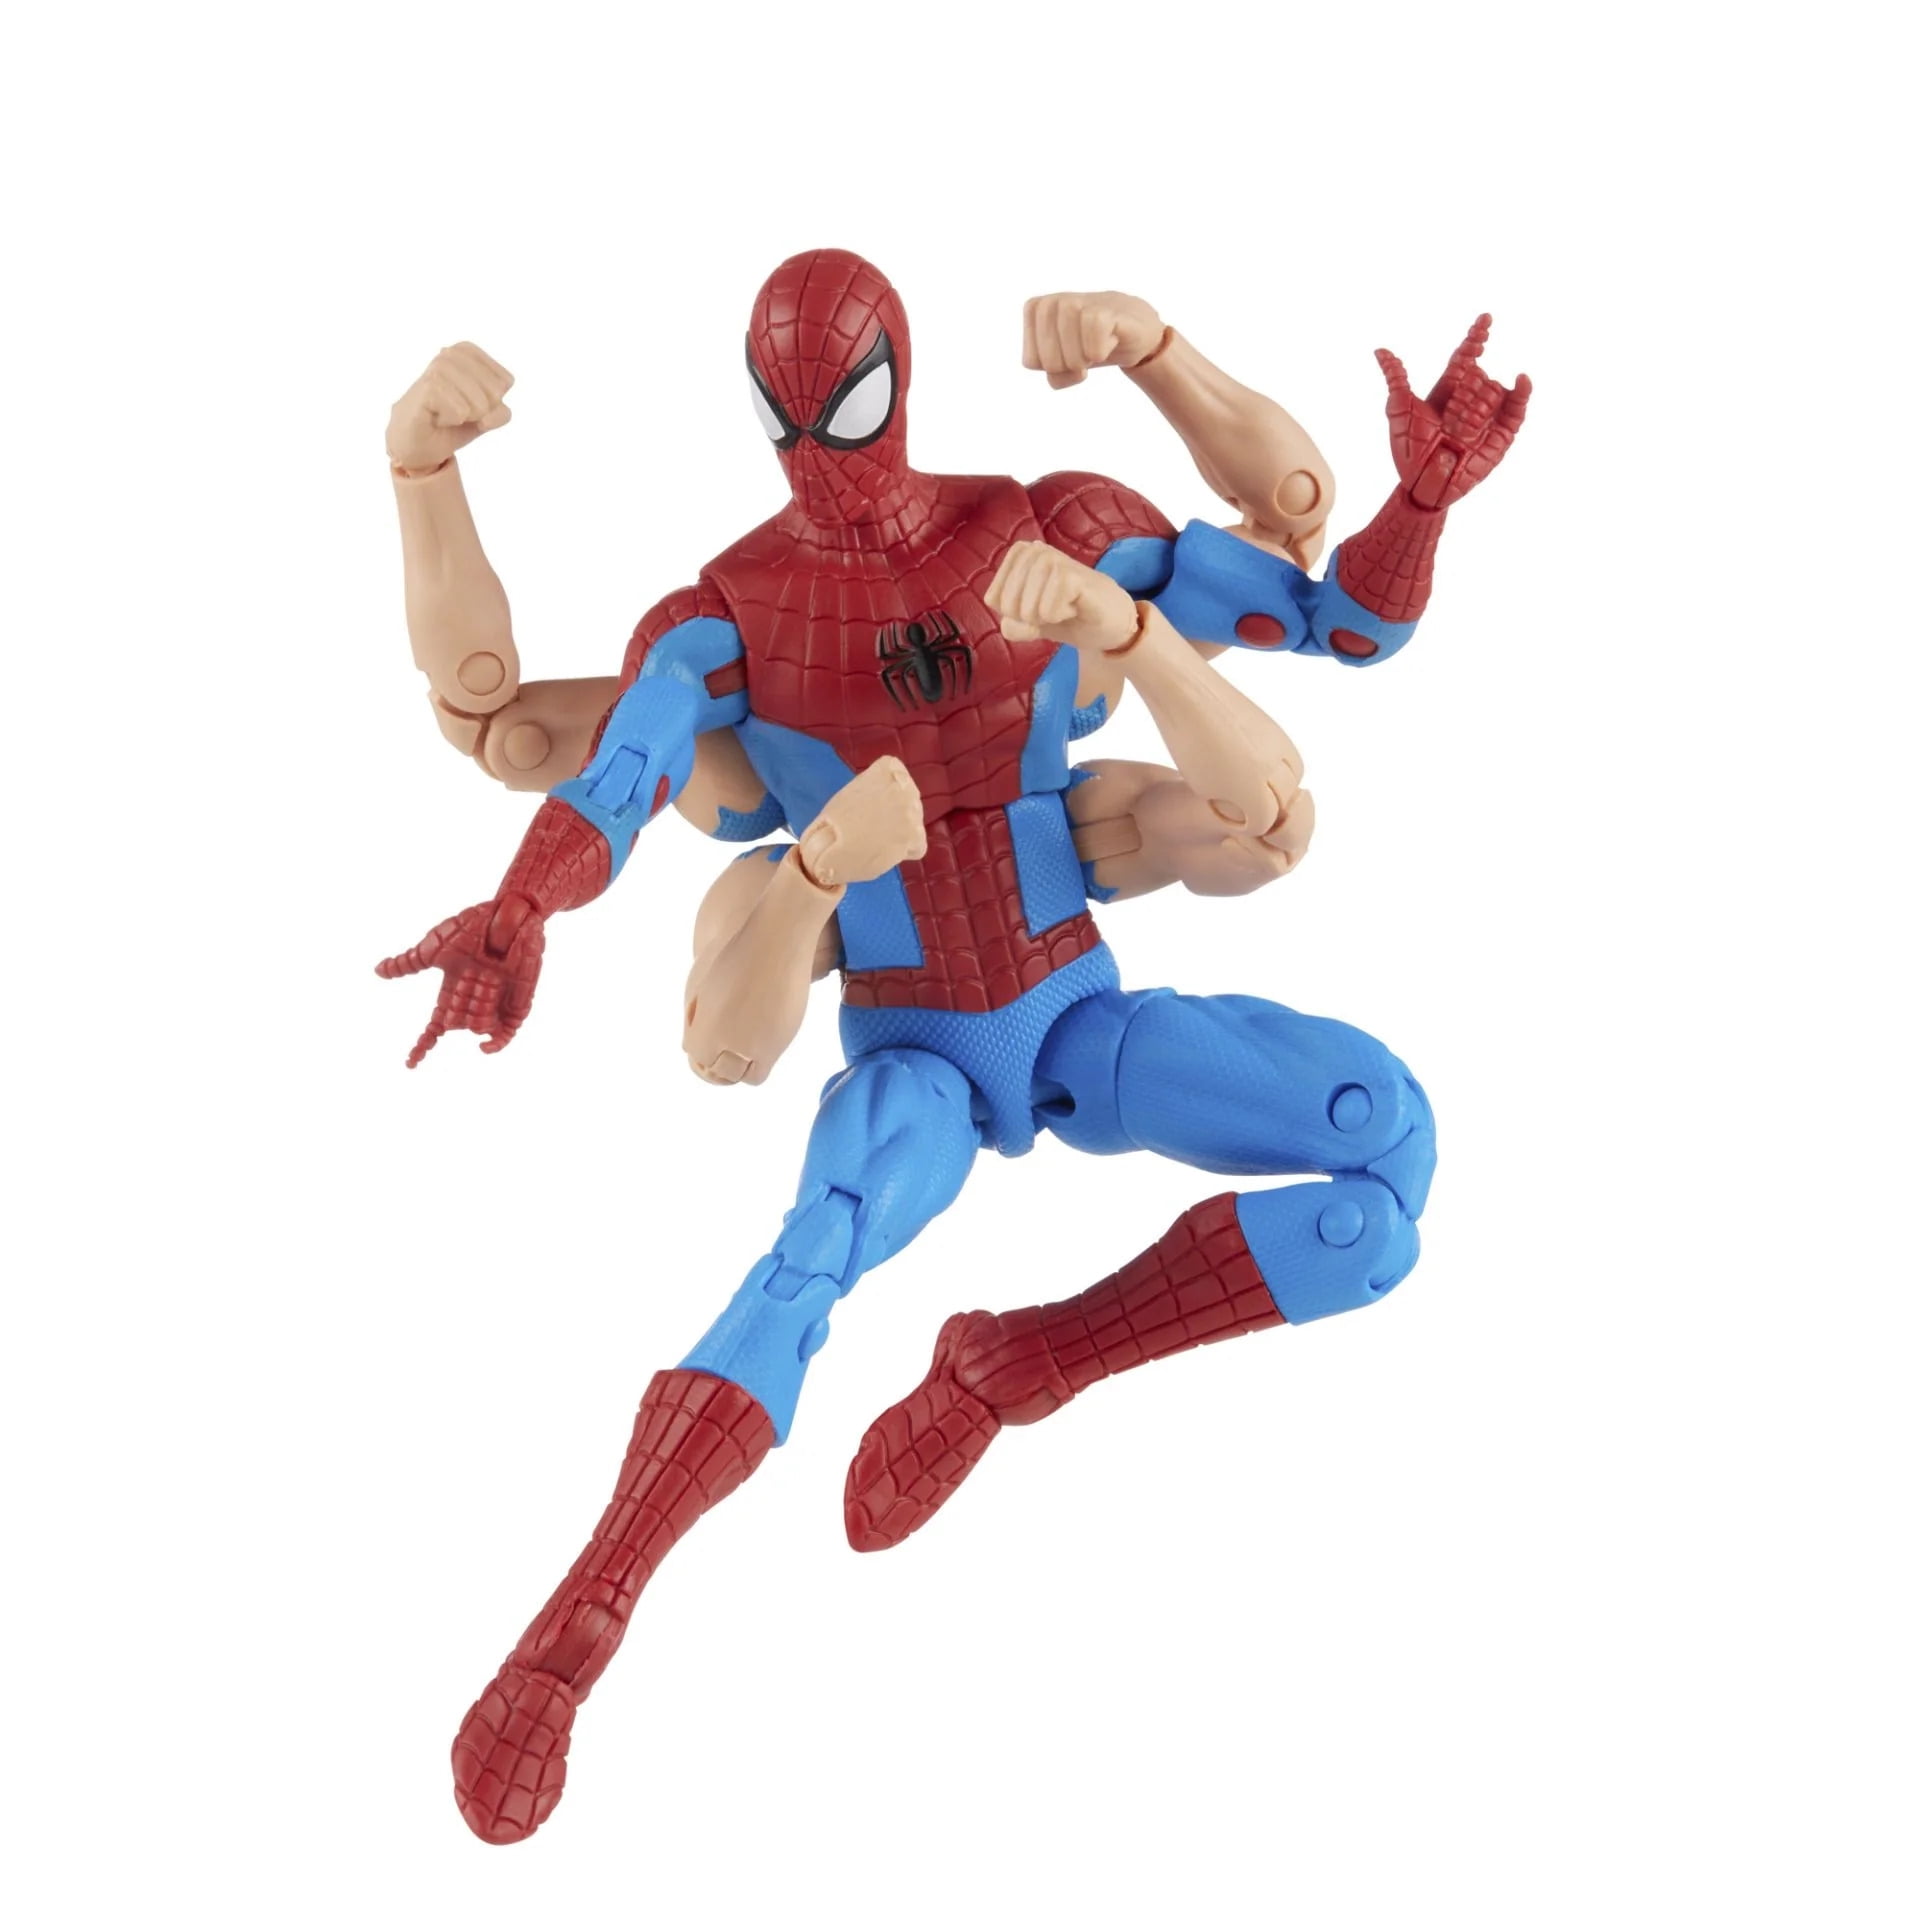 Marvel: Legends Spider-Man vs Morbius Kids Toy Action Figures for Boys &  Girls Ages 4 5 6 7 8 and Up, 2 Pack 